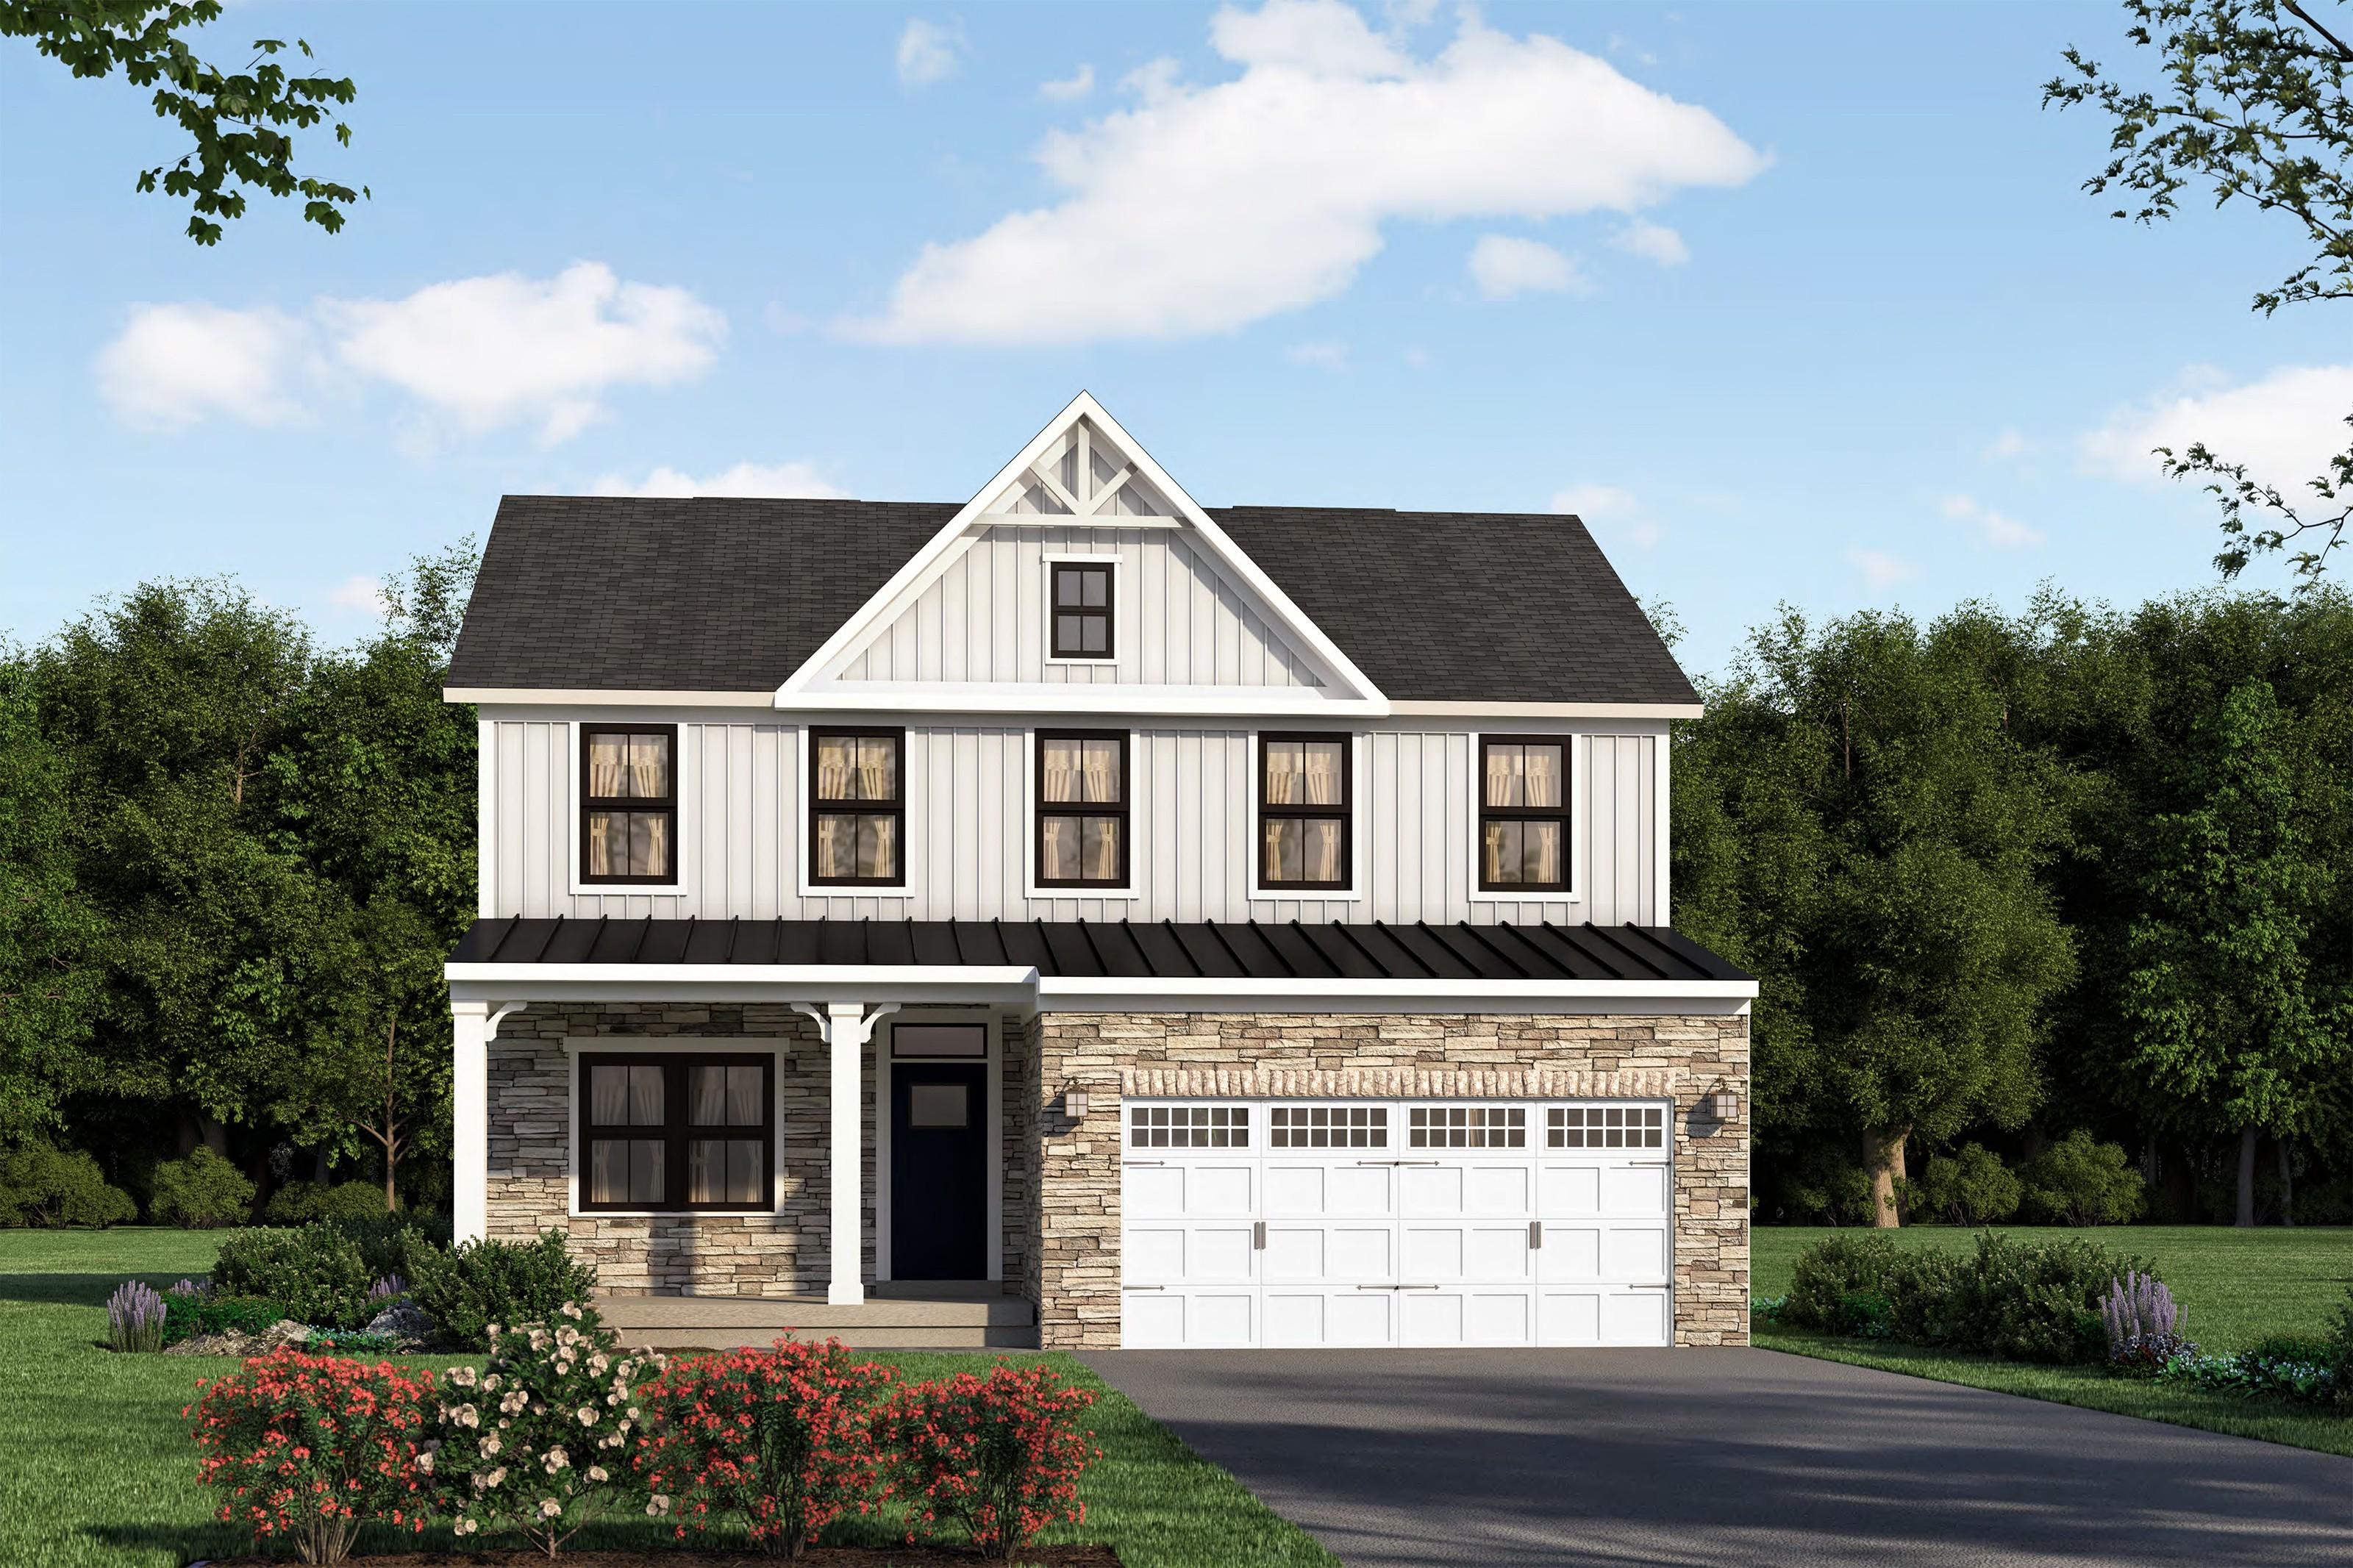 Property Image for 8220 Kirby St. Plan: Hudson